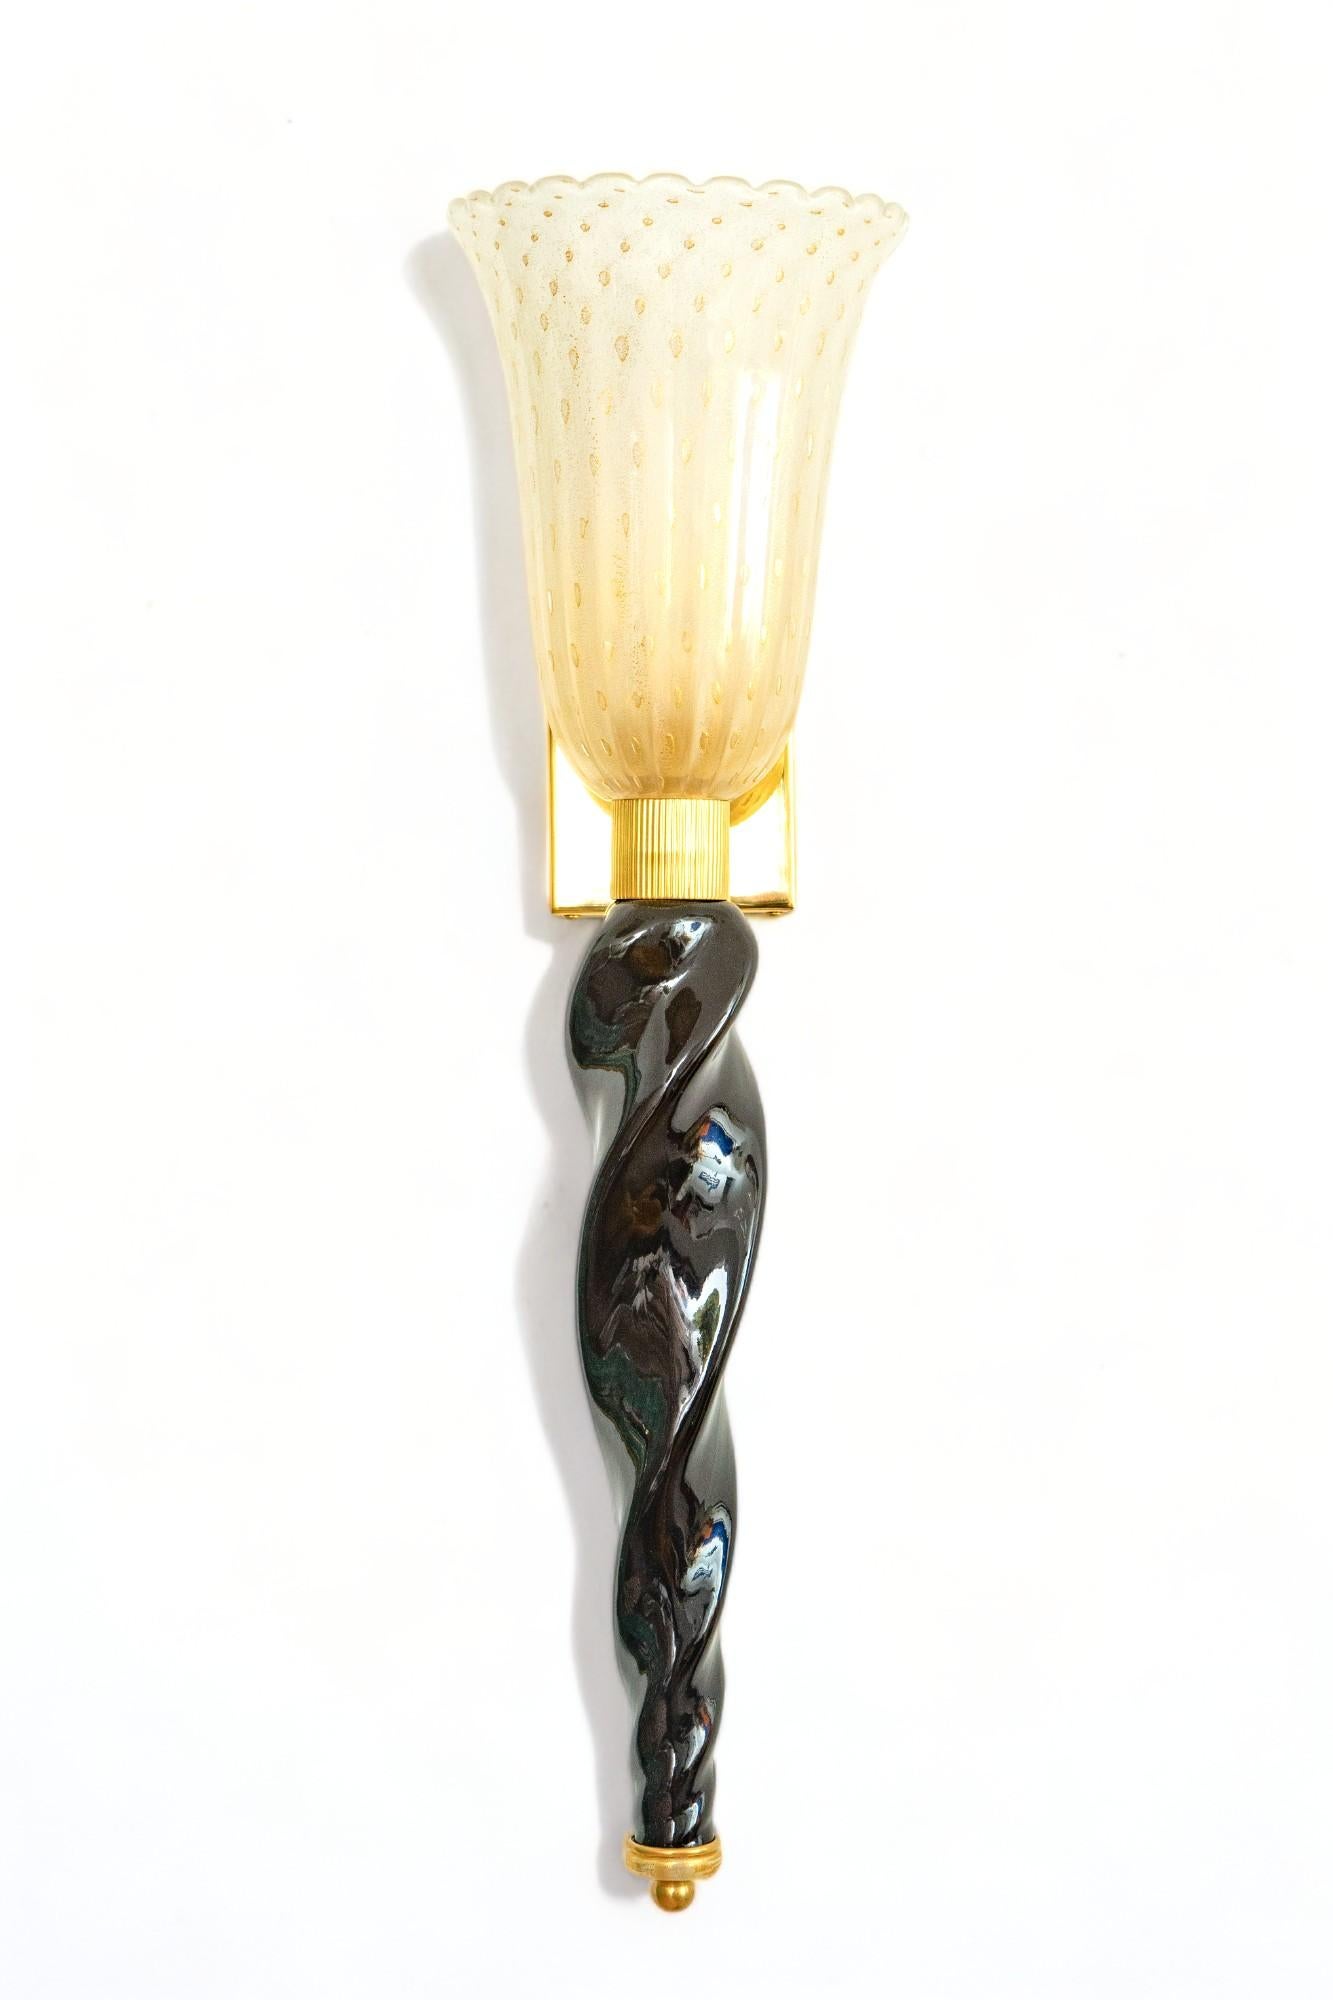 Pair of Art Deco style Murano black and gold glass wall lights torcheres,
 Hand blown frosted white Murano glass shades infused with gilded speckles, twisted black Murano glass stem, mounted on brass plated frame
Handcrafted by a team of artisans in